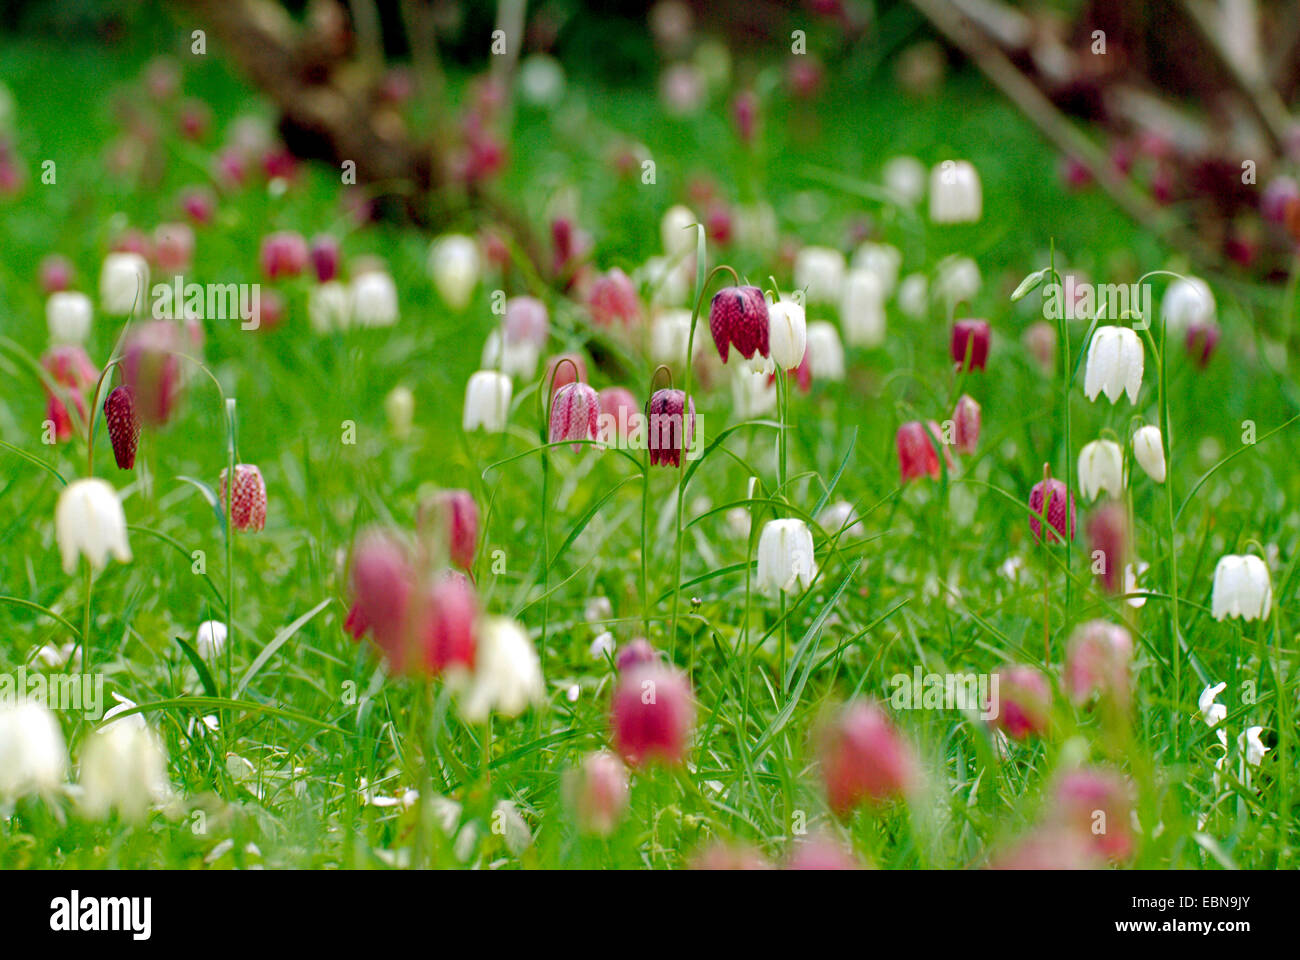 common fritillary, snake's-head fritillaria (Fritillaria meleagris), blooming in white and violet in a meadow, Germany Stock Photo